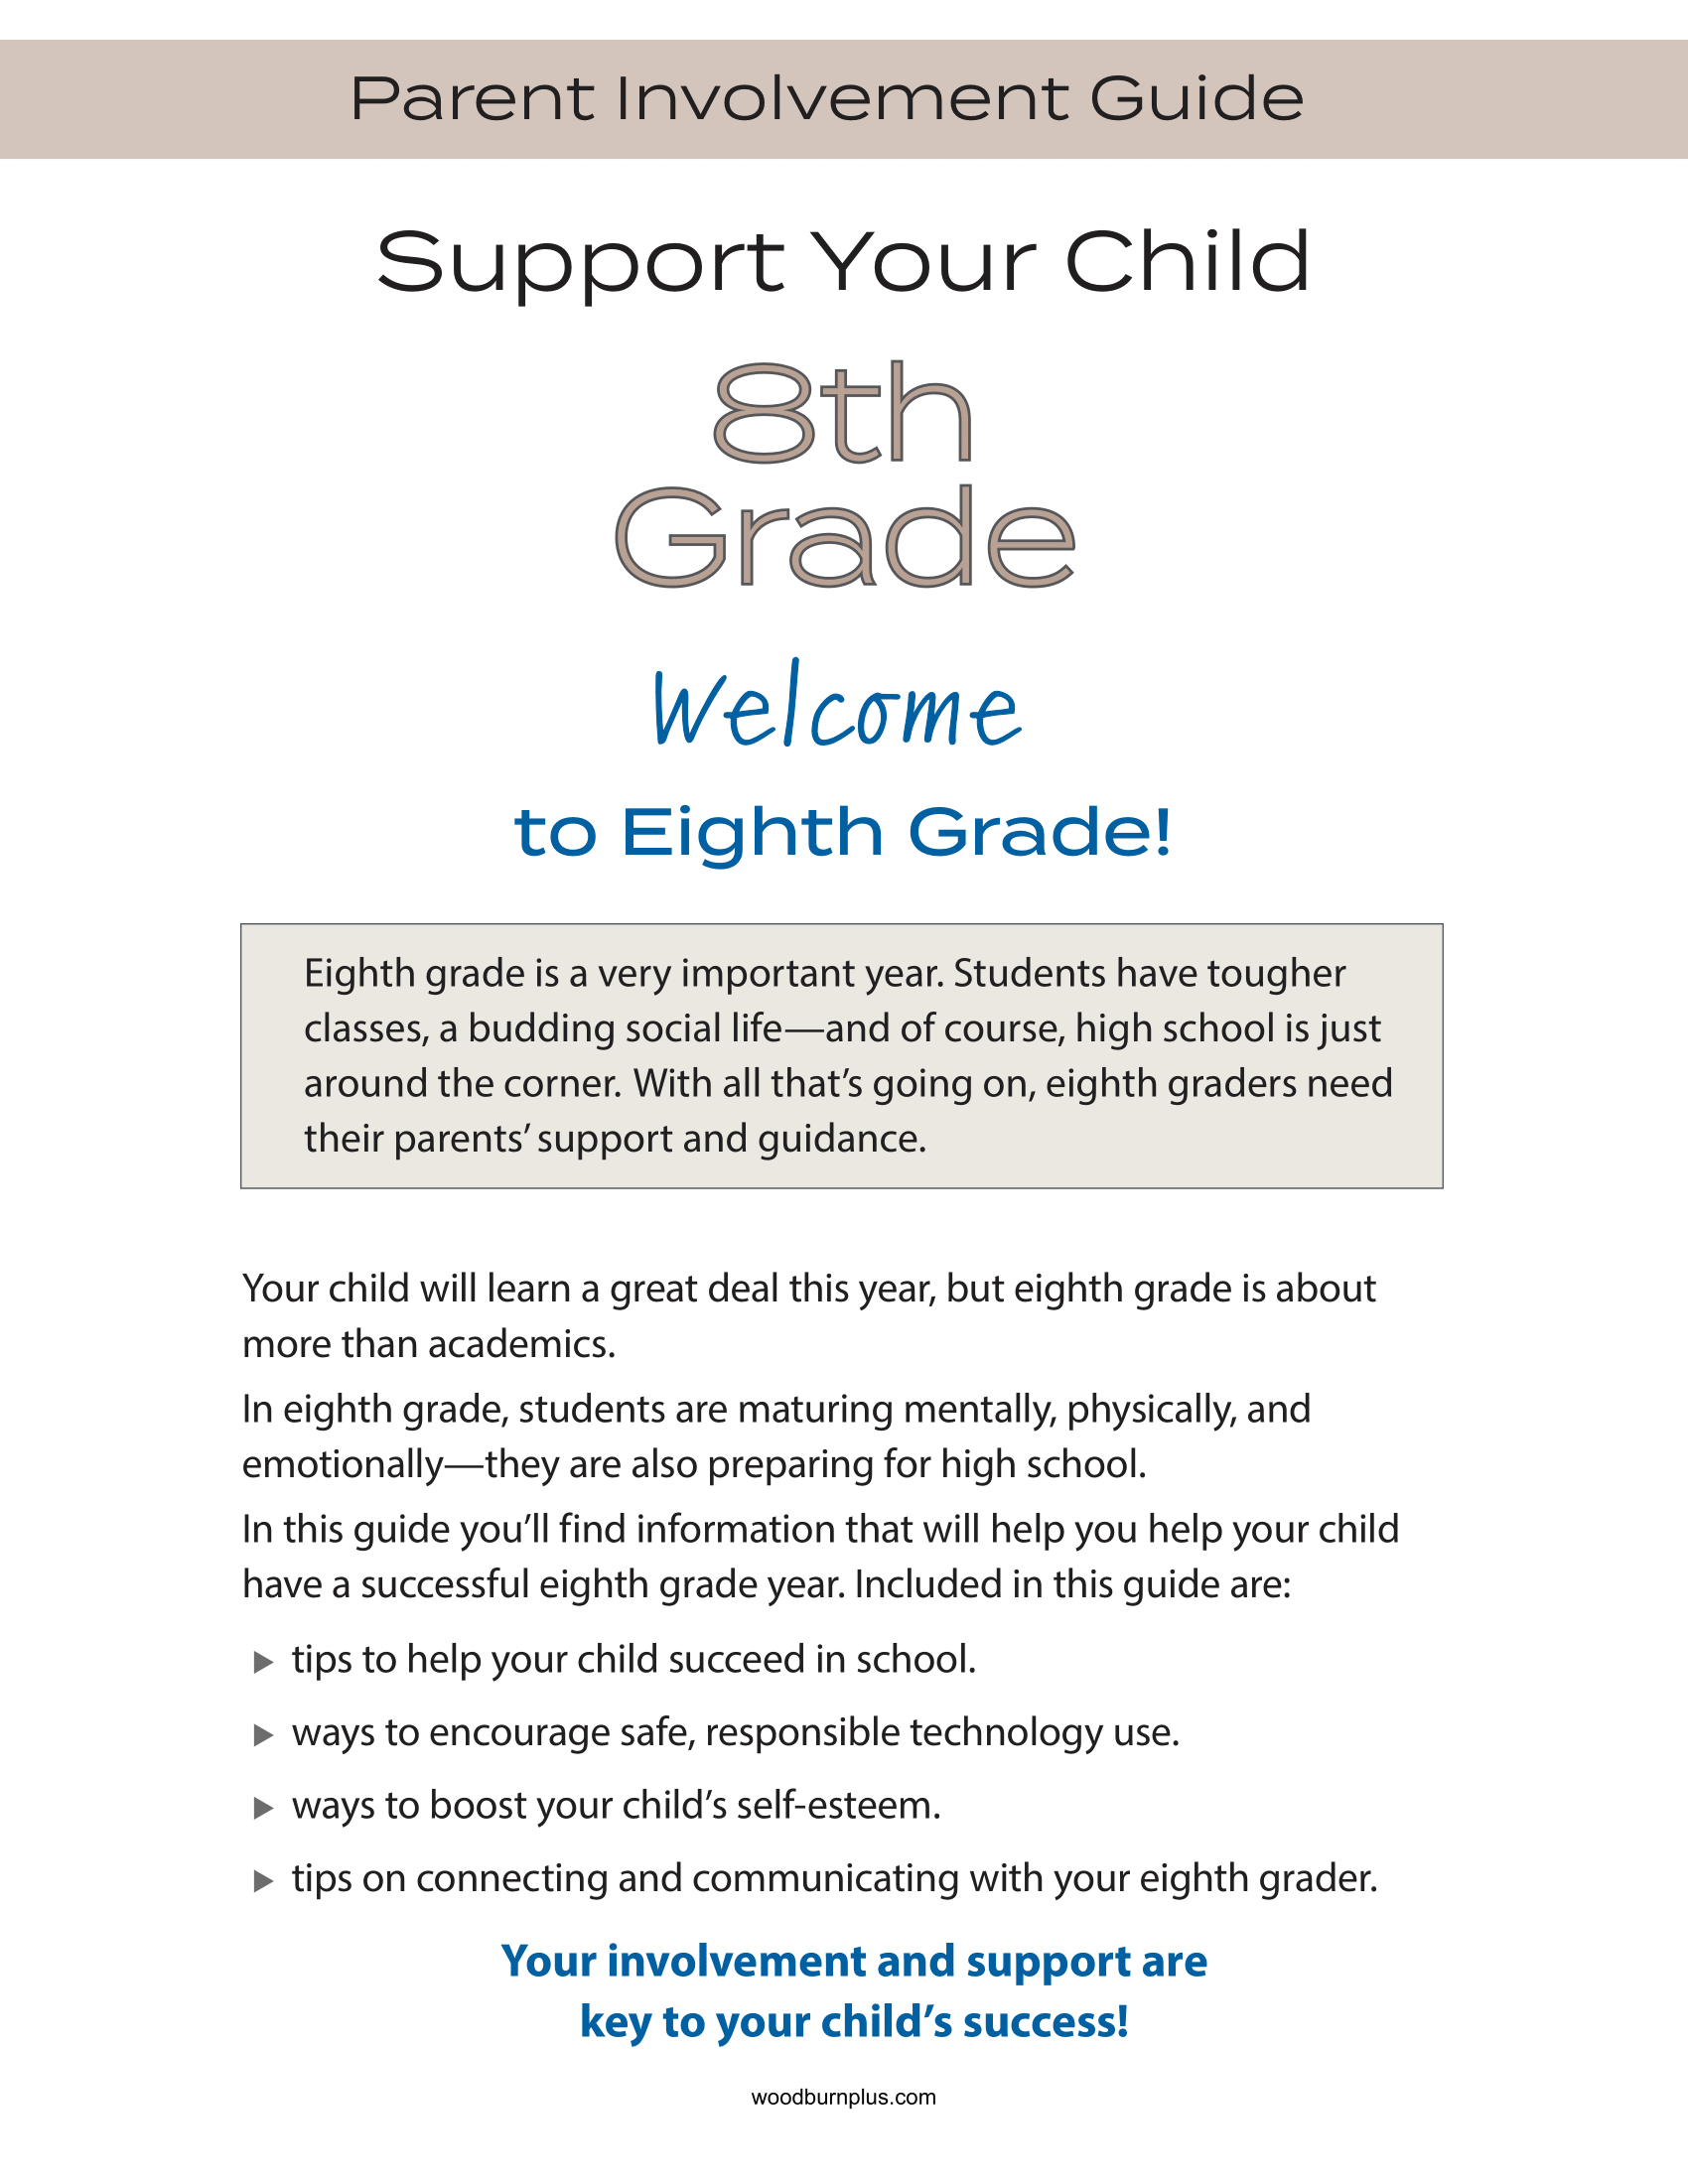 Support Your Child - 8th Grade